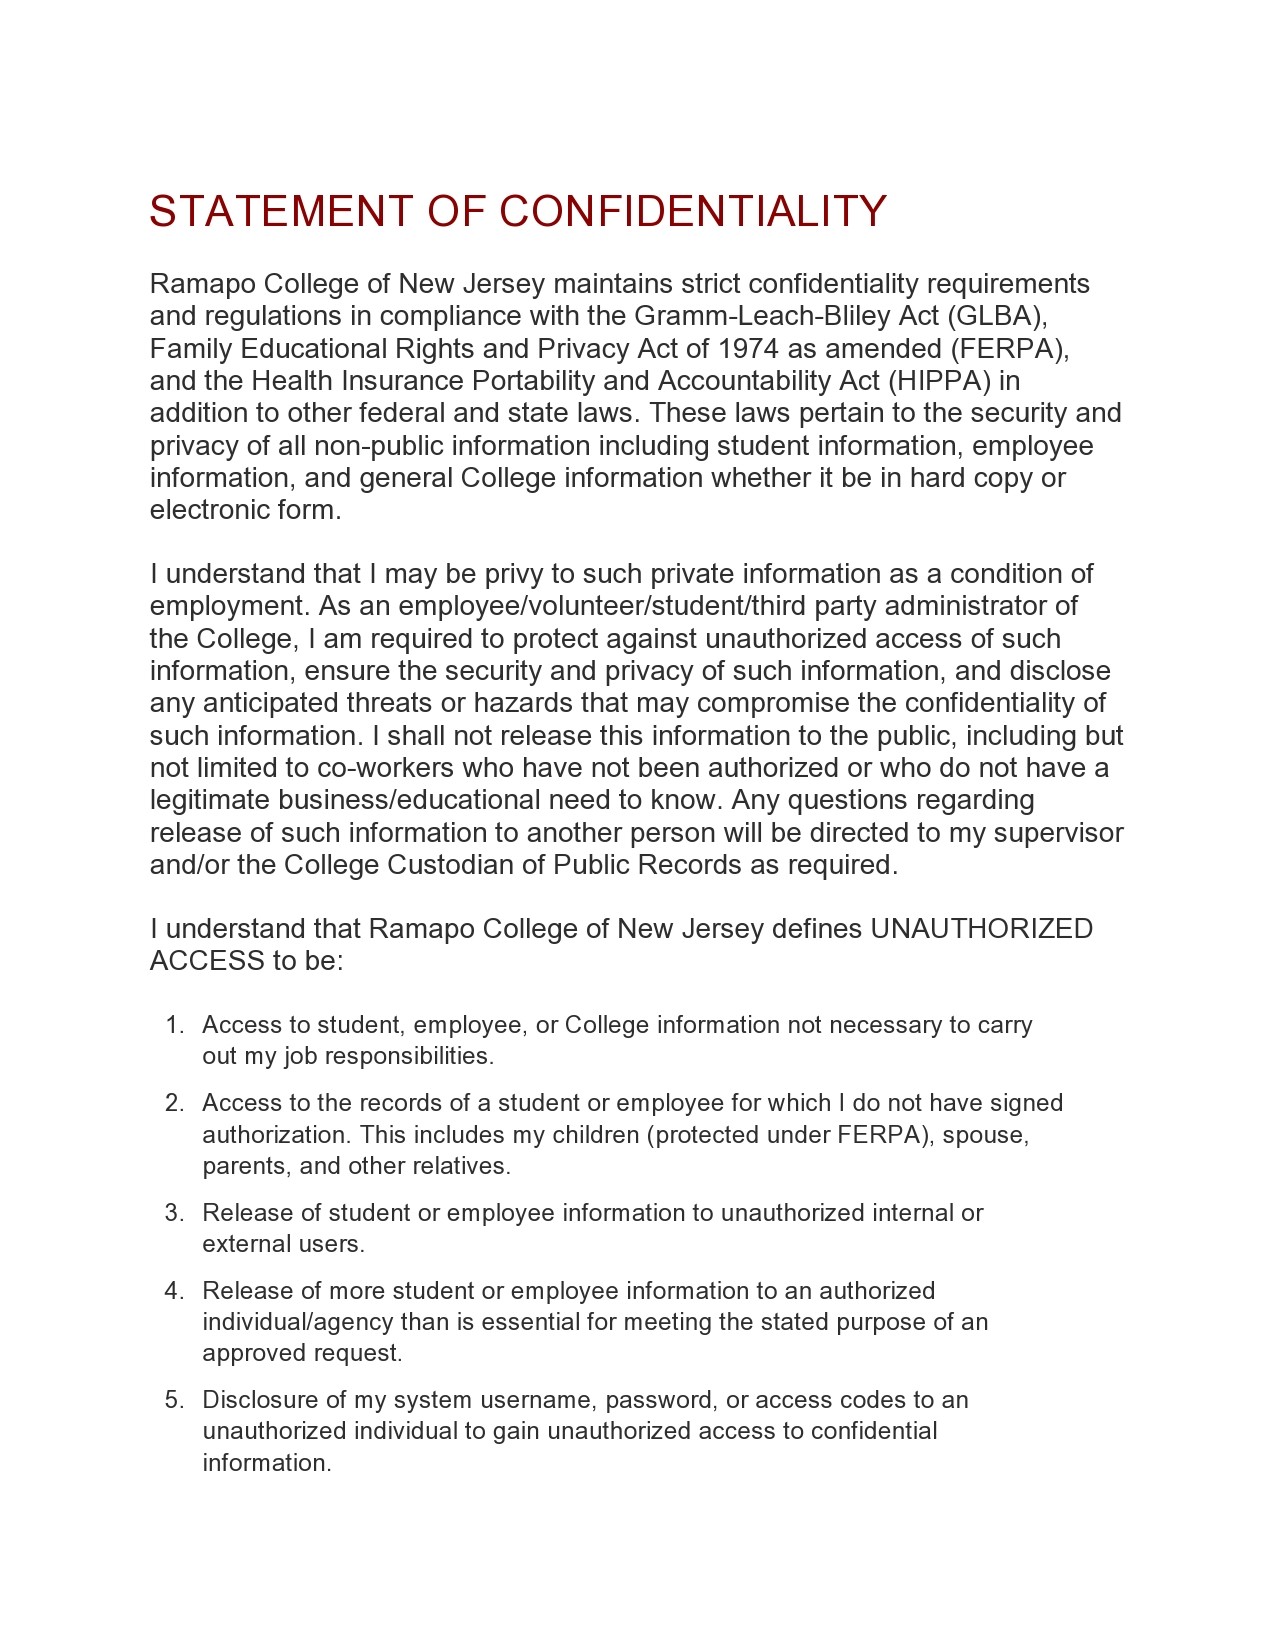 24 Simple Confidentiality Statement Agreement Templates ᐅ